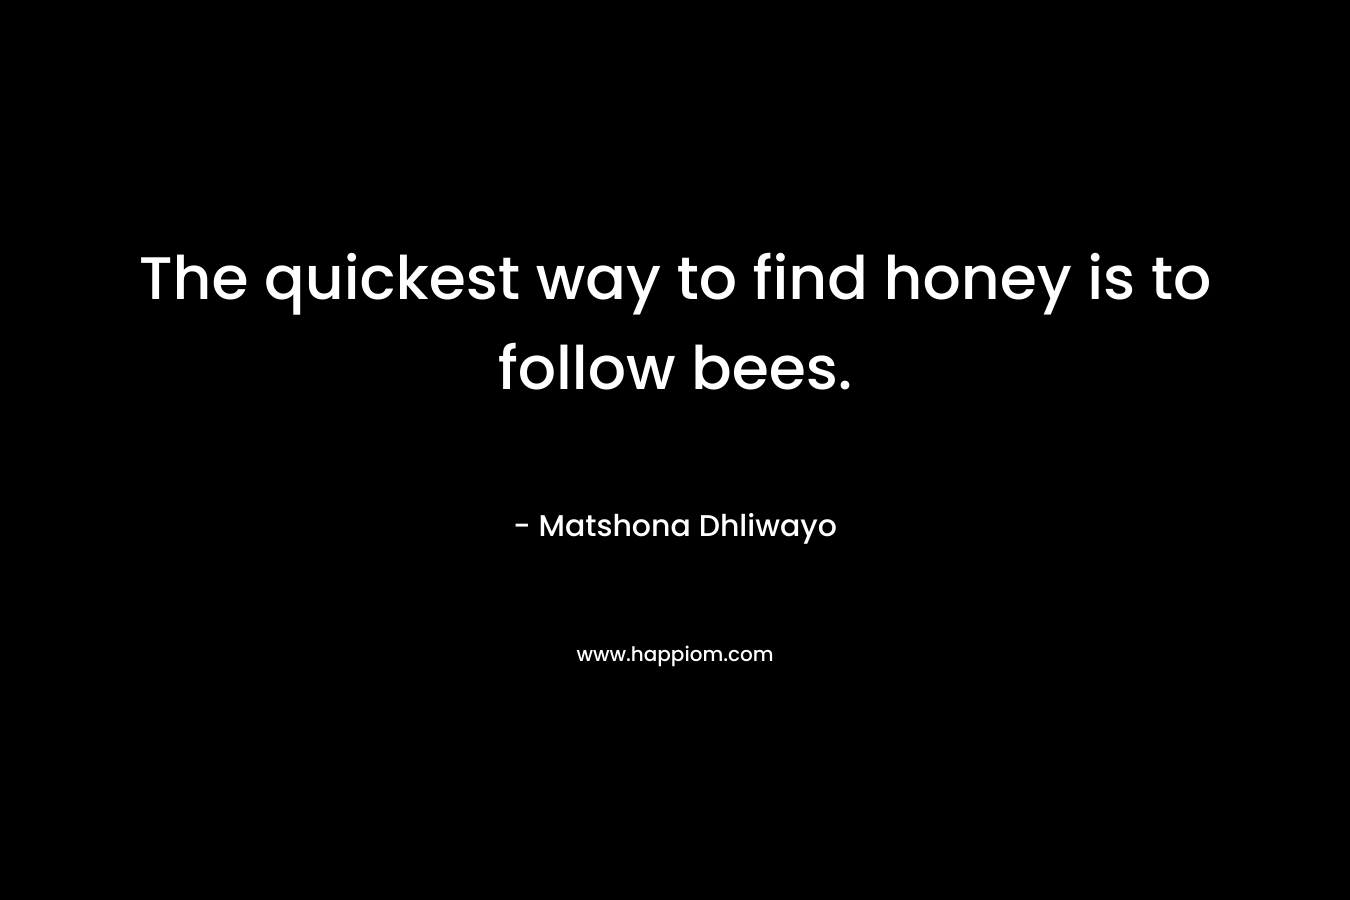 The quickest way to find honey is to follow bees.